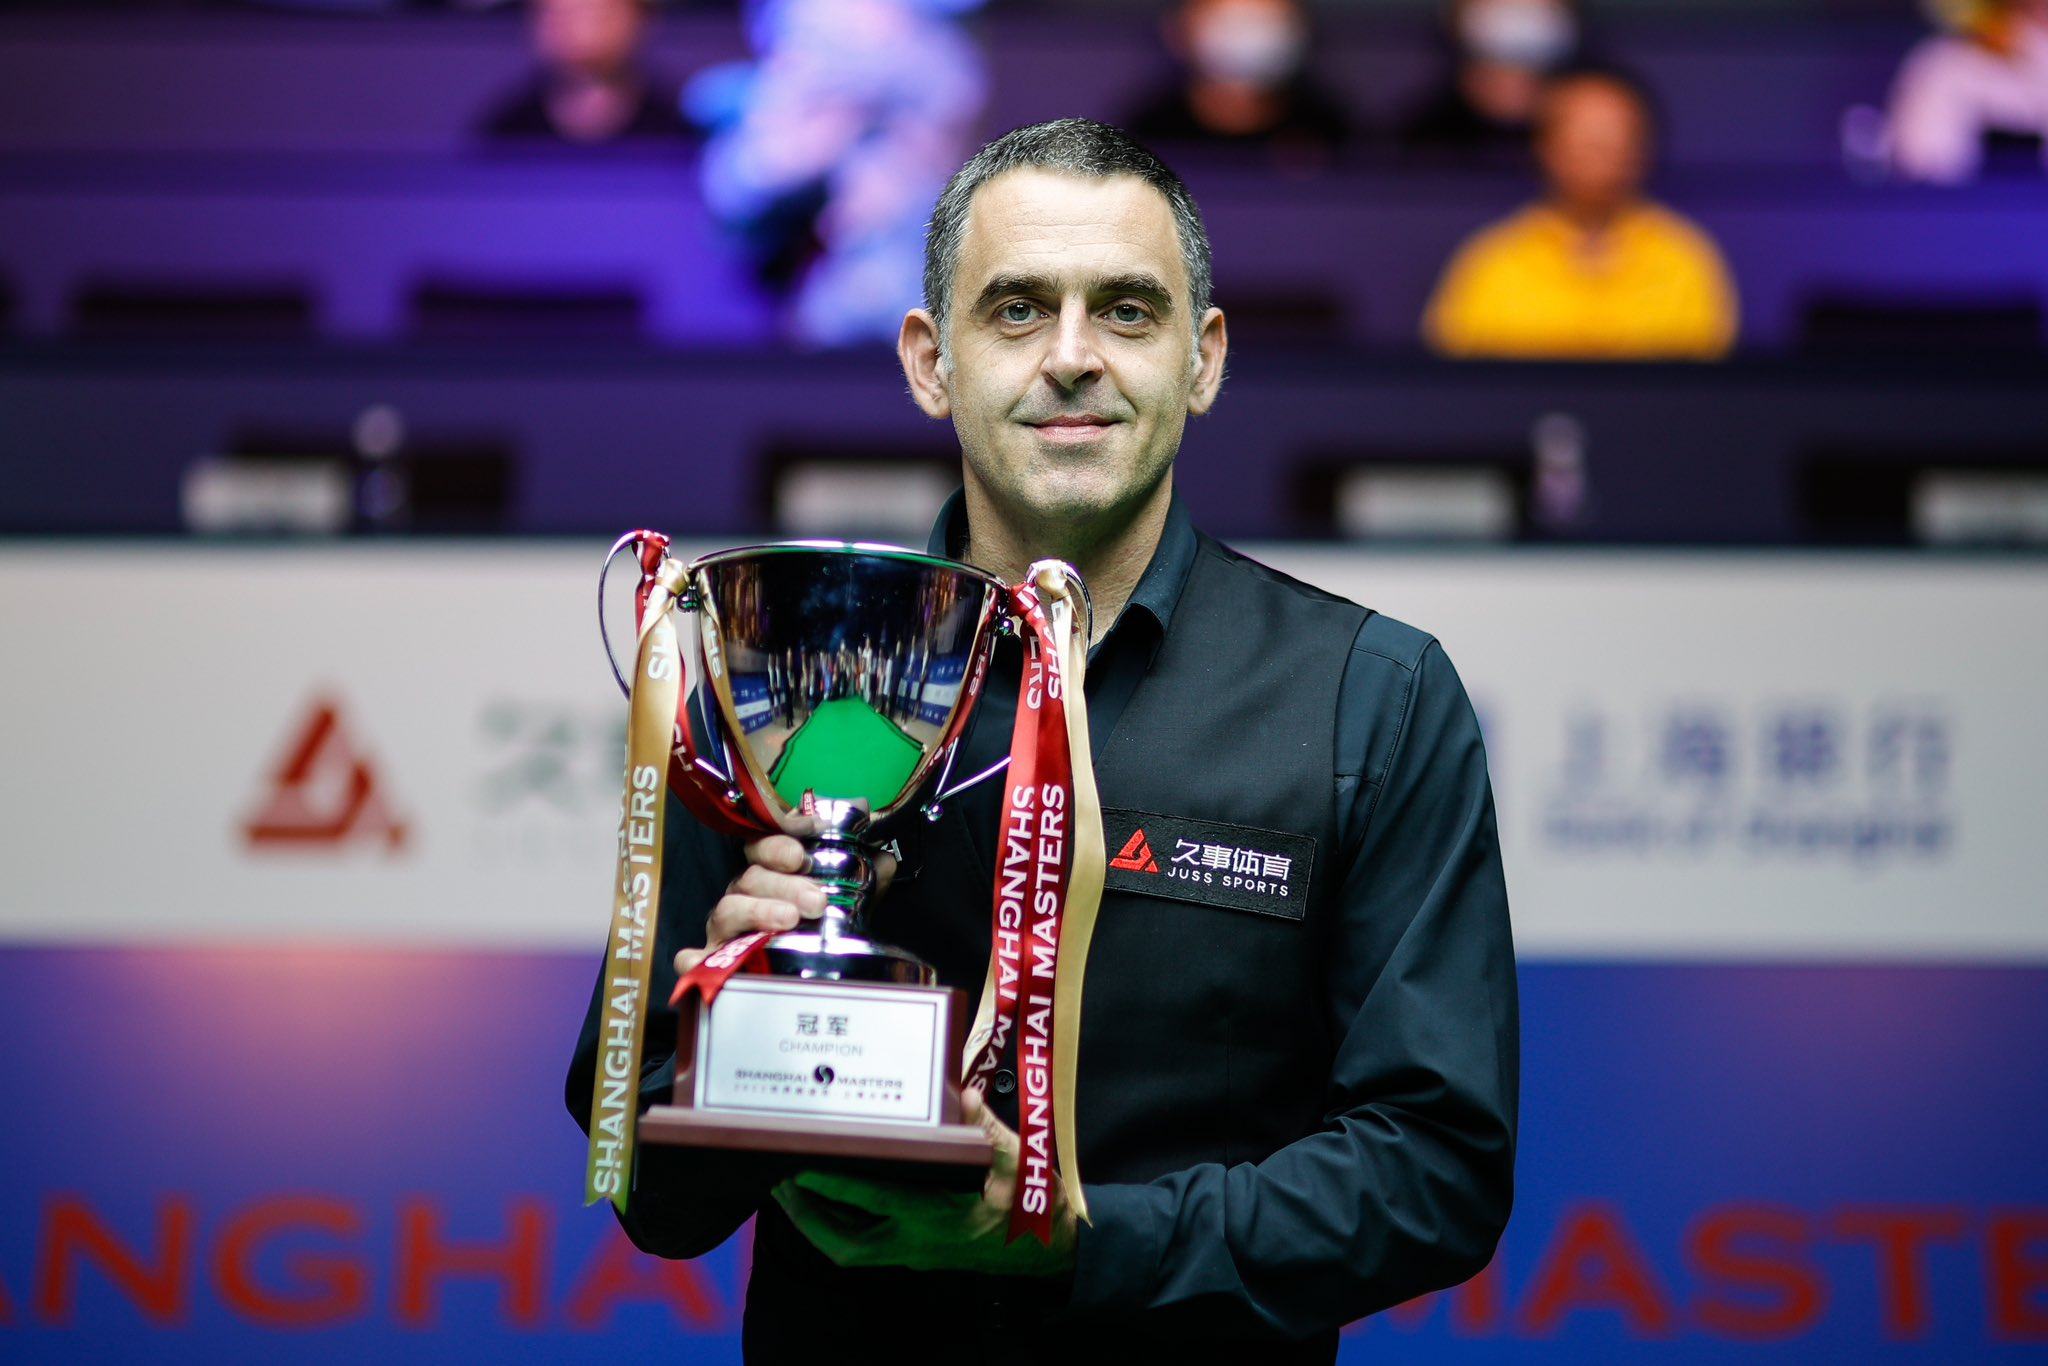 Ronnie O’Sullivan lifts the Shanghai Masters trophy for a fifth time. Photo: Twitter/@ronnieo147